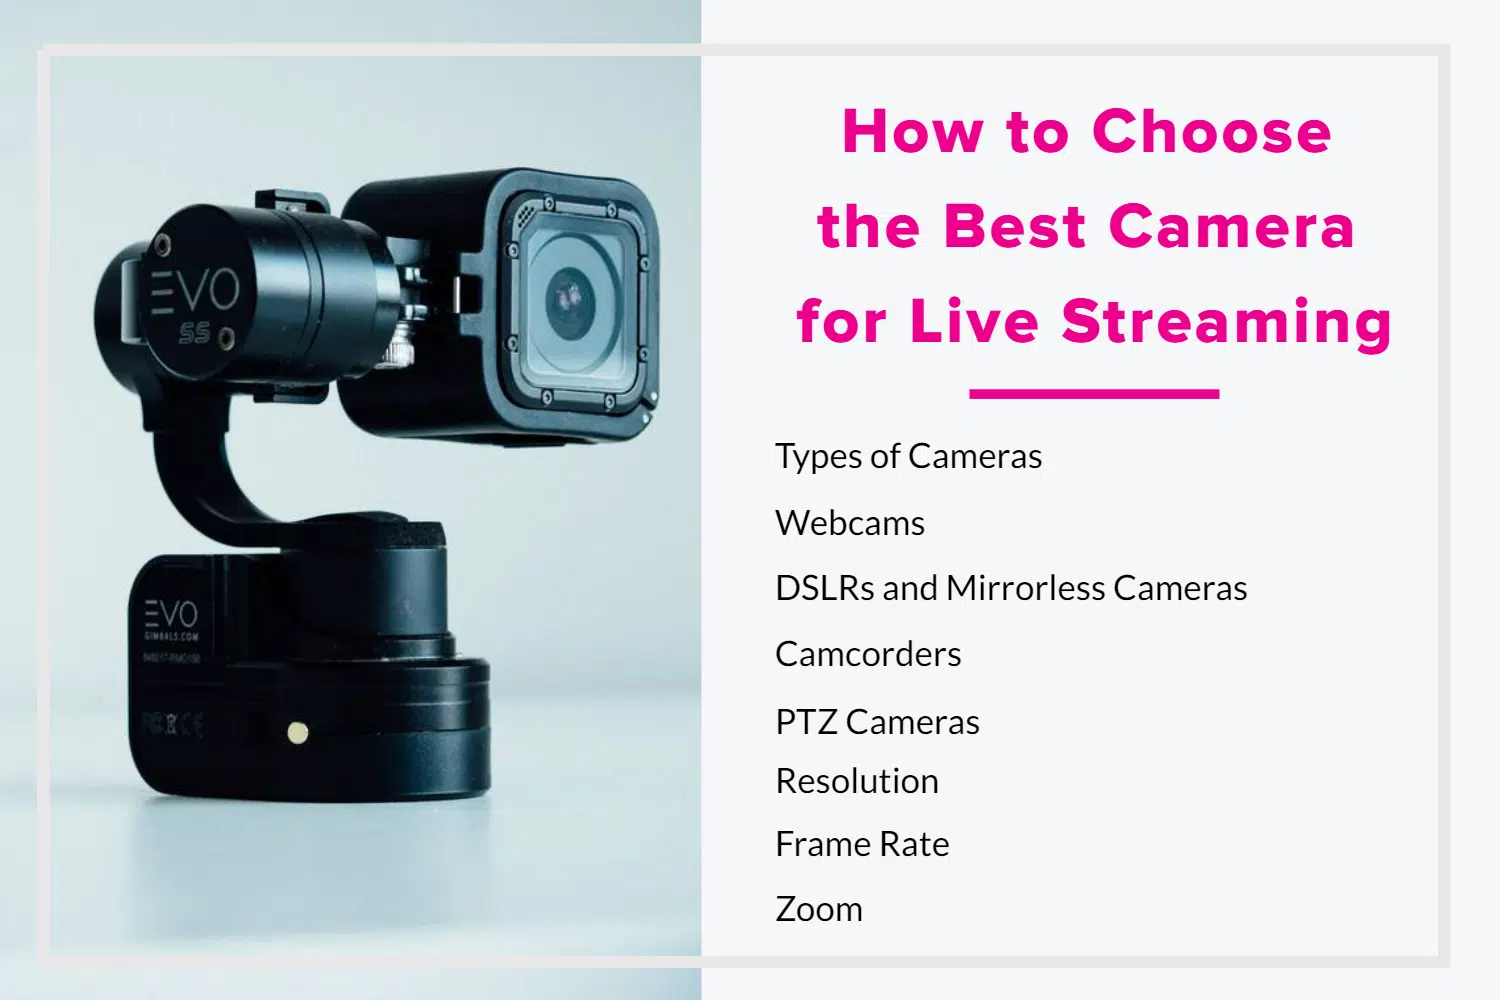 How to Choose the Best Camera for Live Streaming